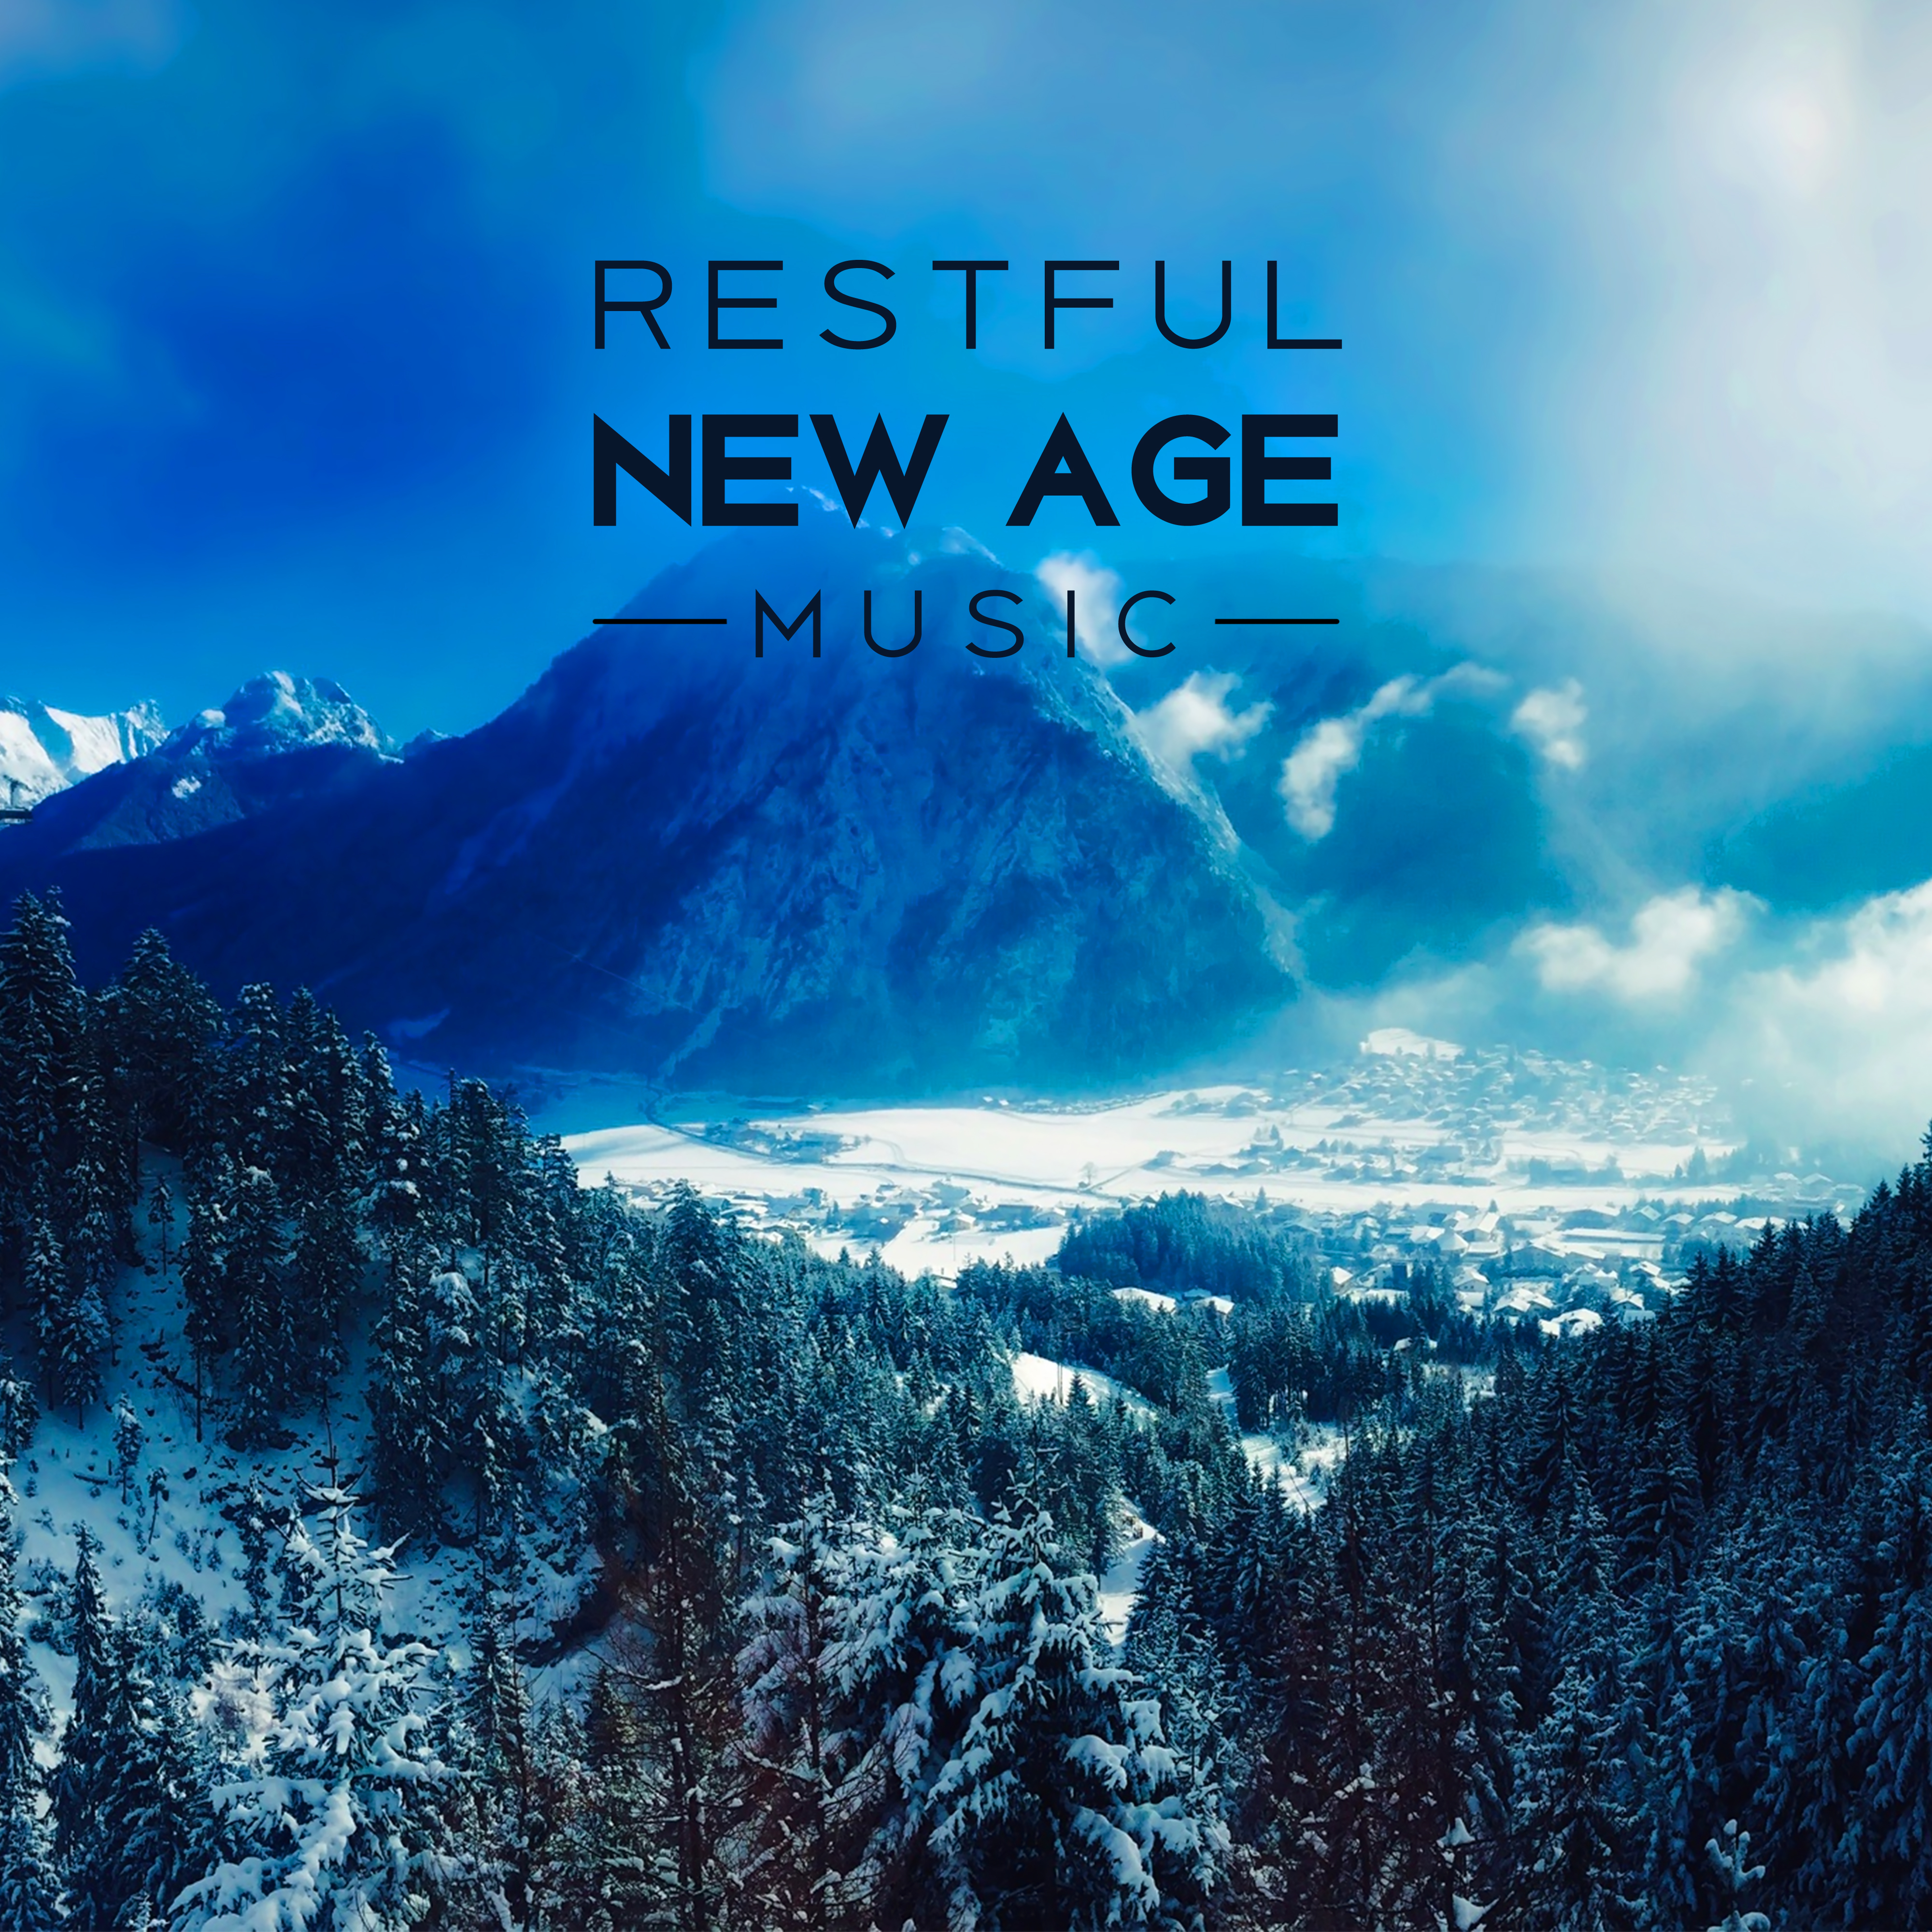 Restful New Age Music – Sounds to Rest, Music to Calm Down, Nature Sounds, Healing Waves, Soft Relaxation